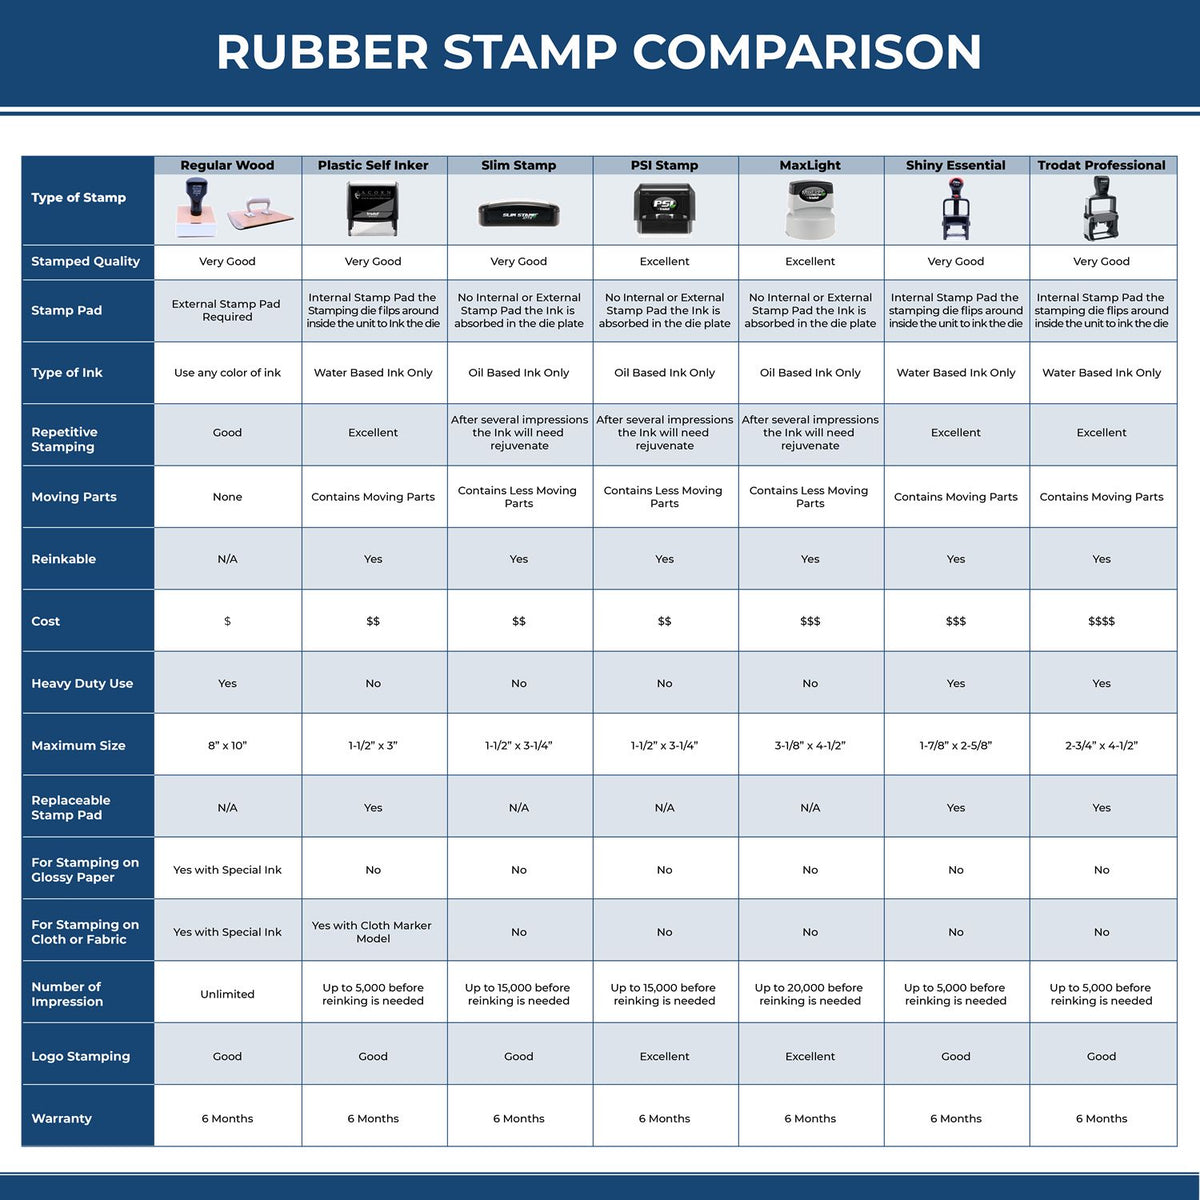 Large Self Inking Super Stamp 4651S Rubber Stamp Comparison